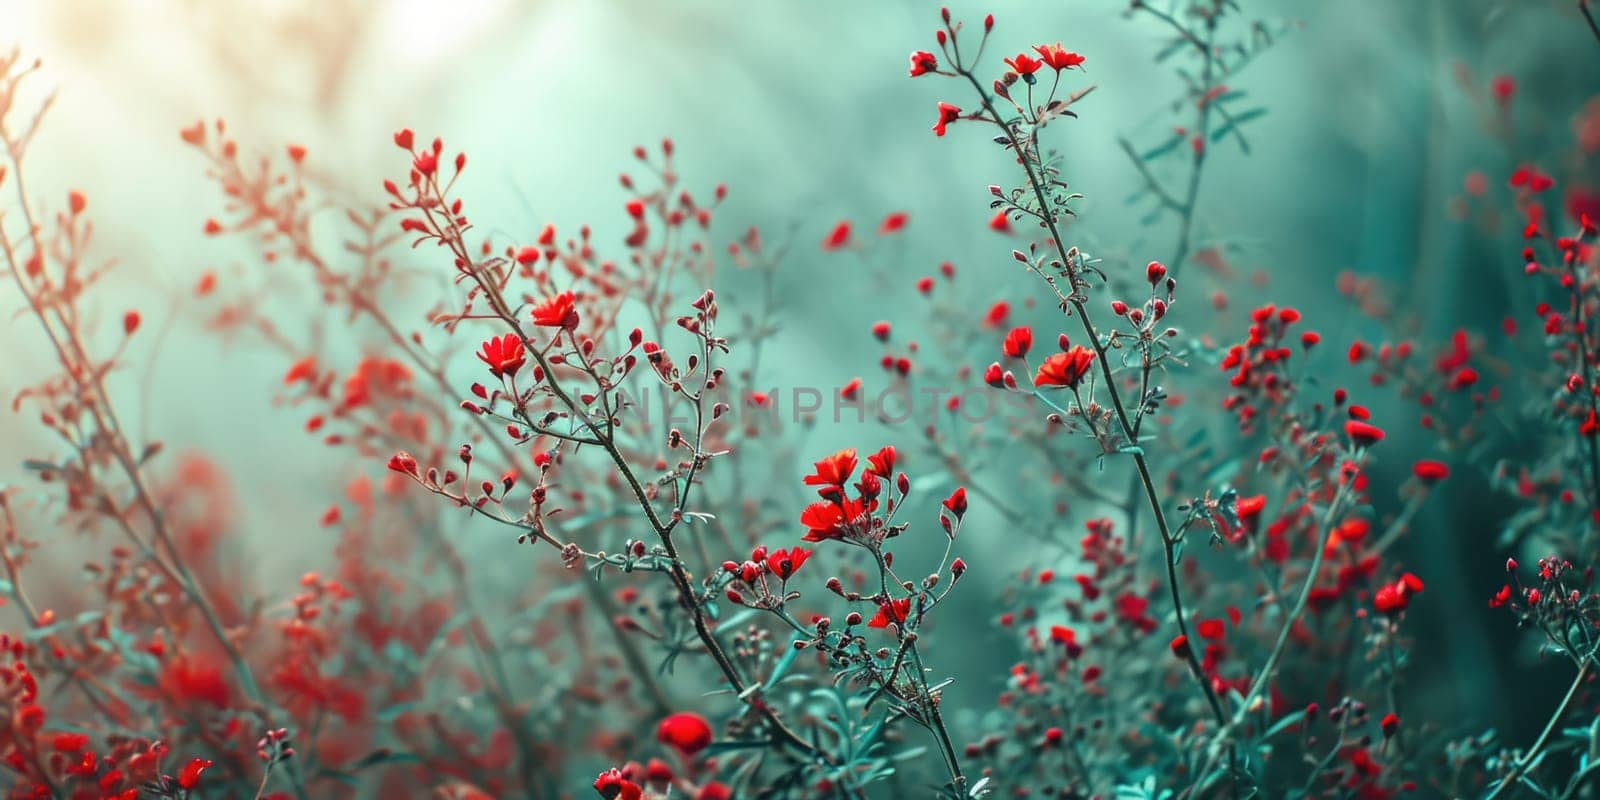 A close up picture of the red flower and green plant growing in nature. AIGX01. by biancoblue